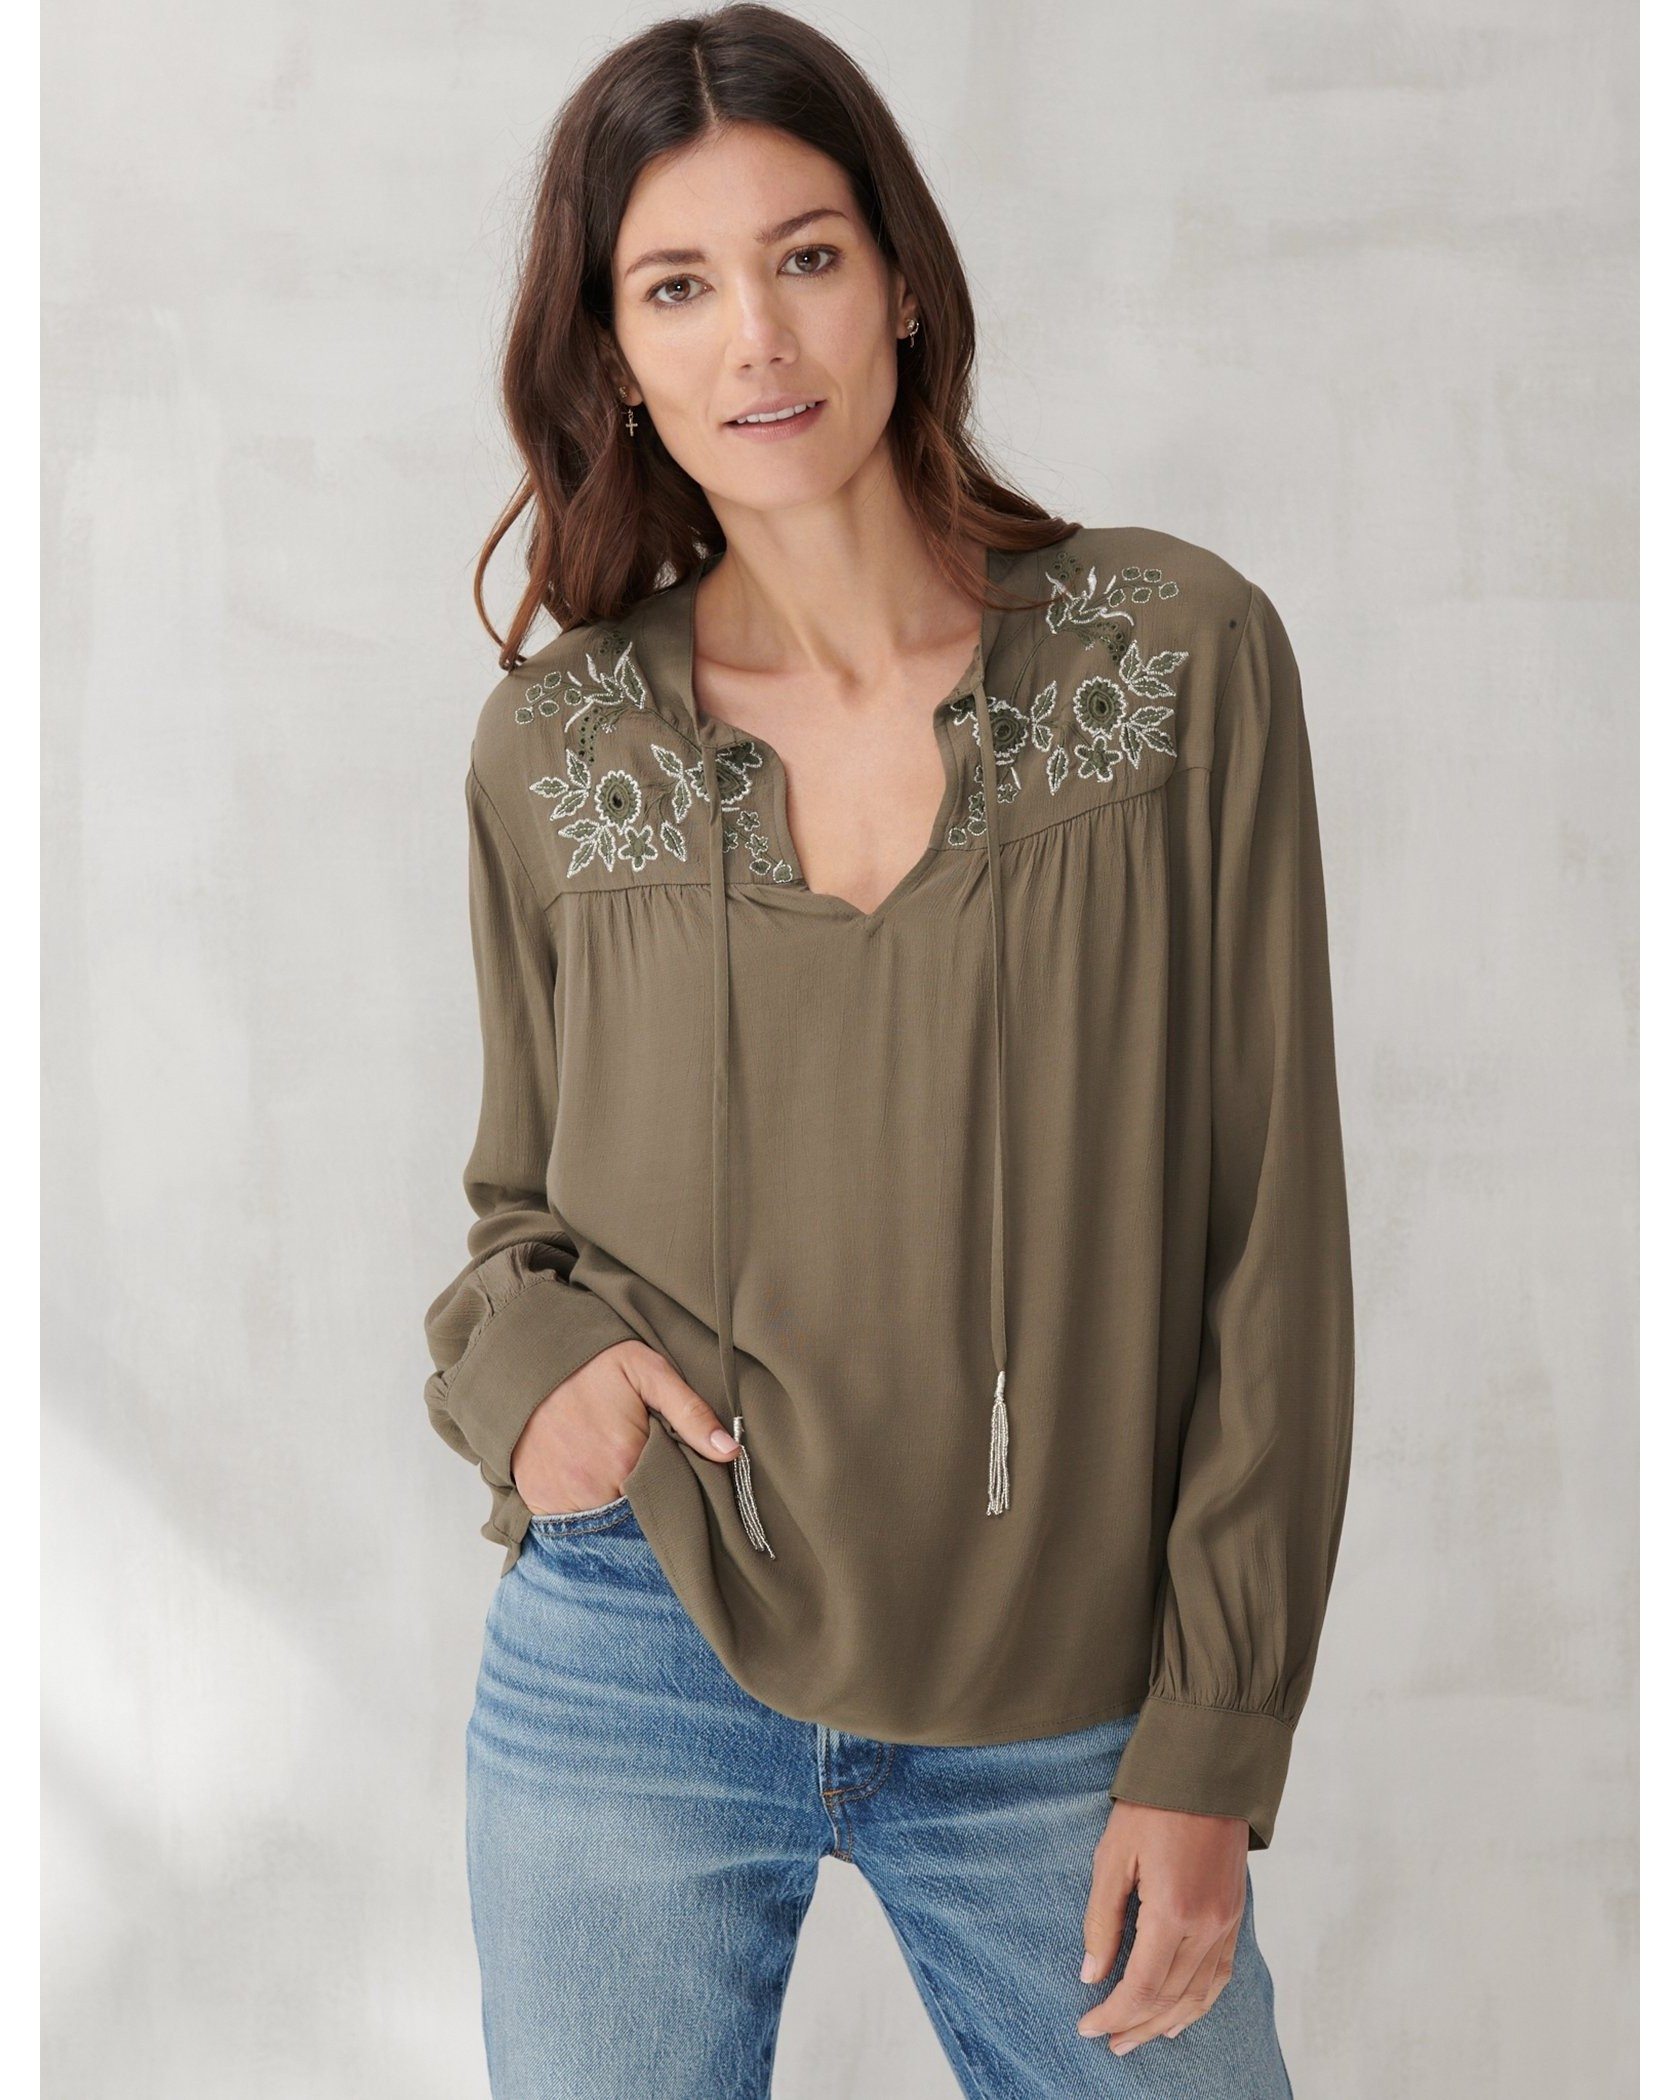 EMBROIDERED SHINE PEASANT TOP